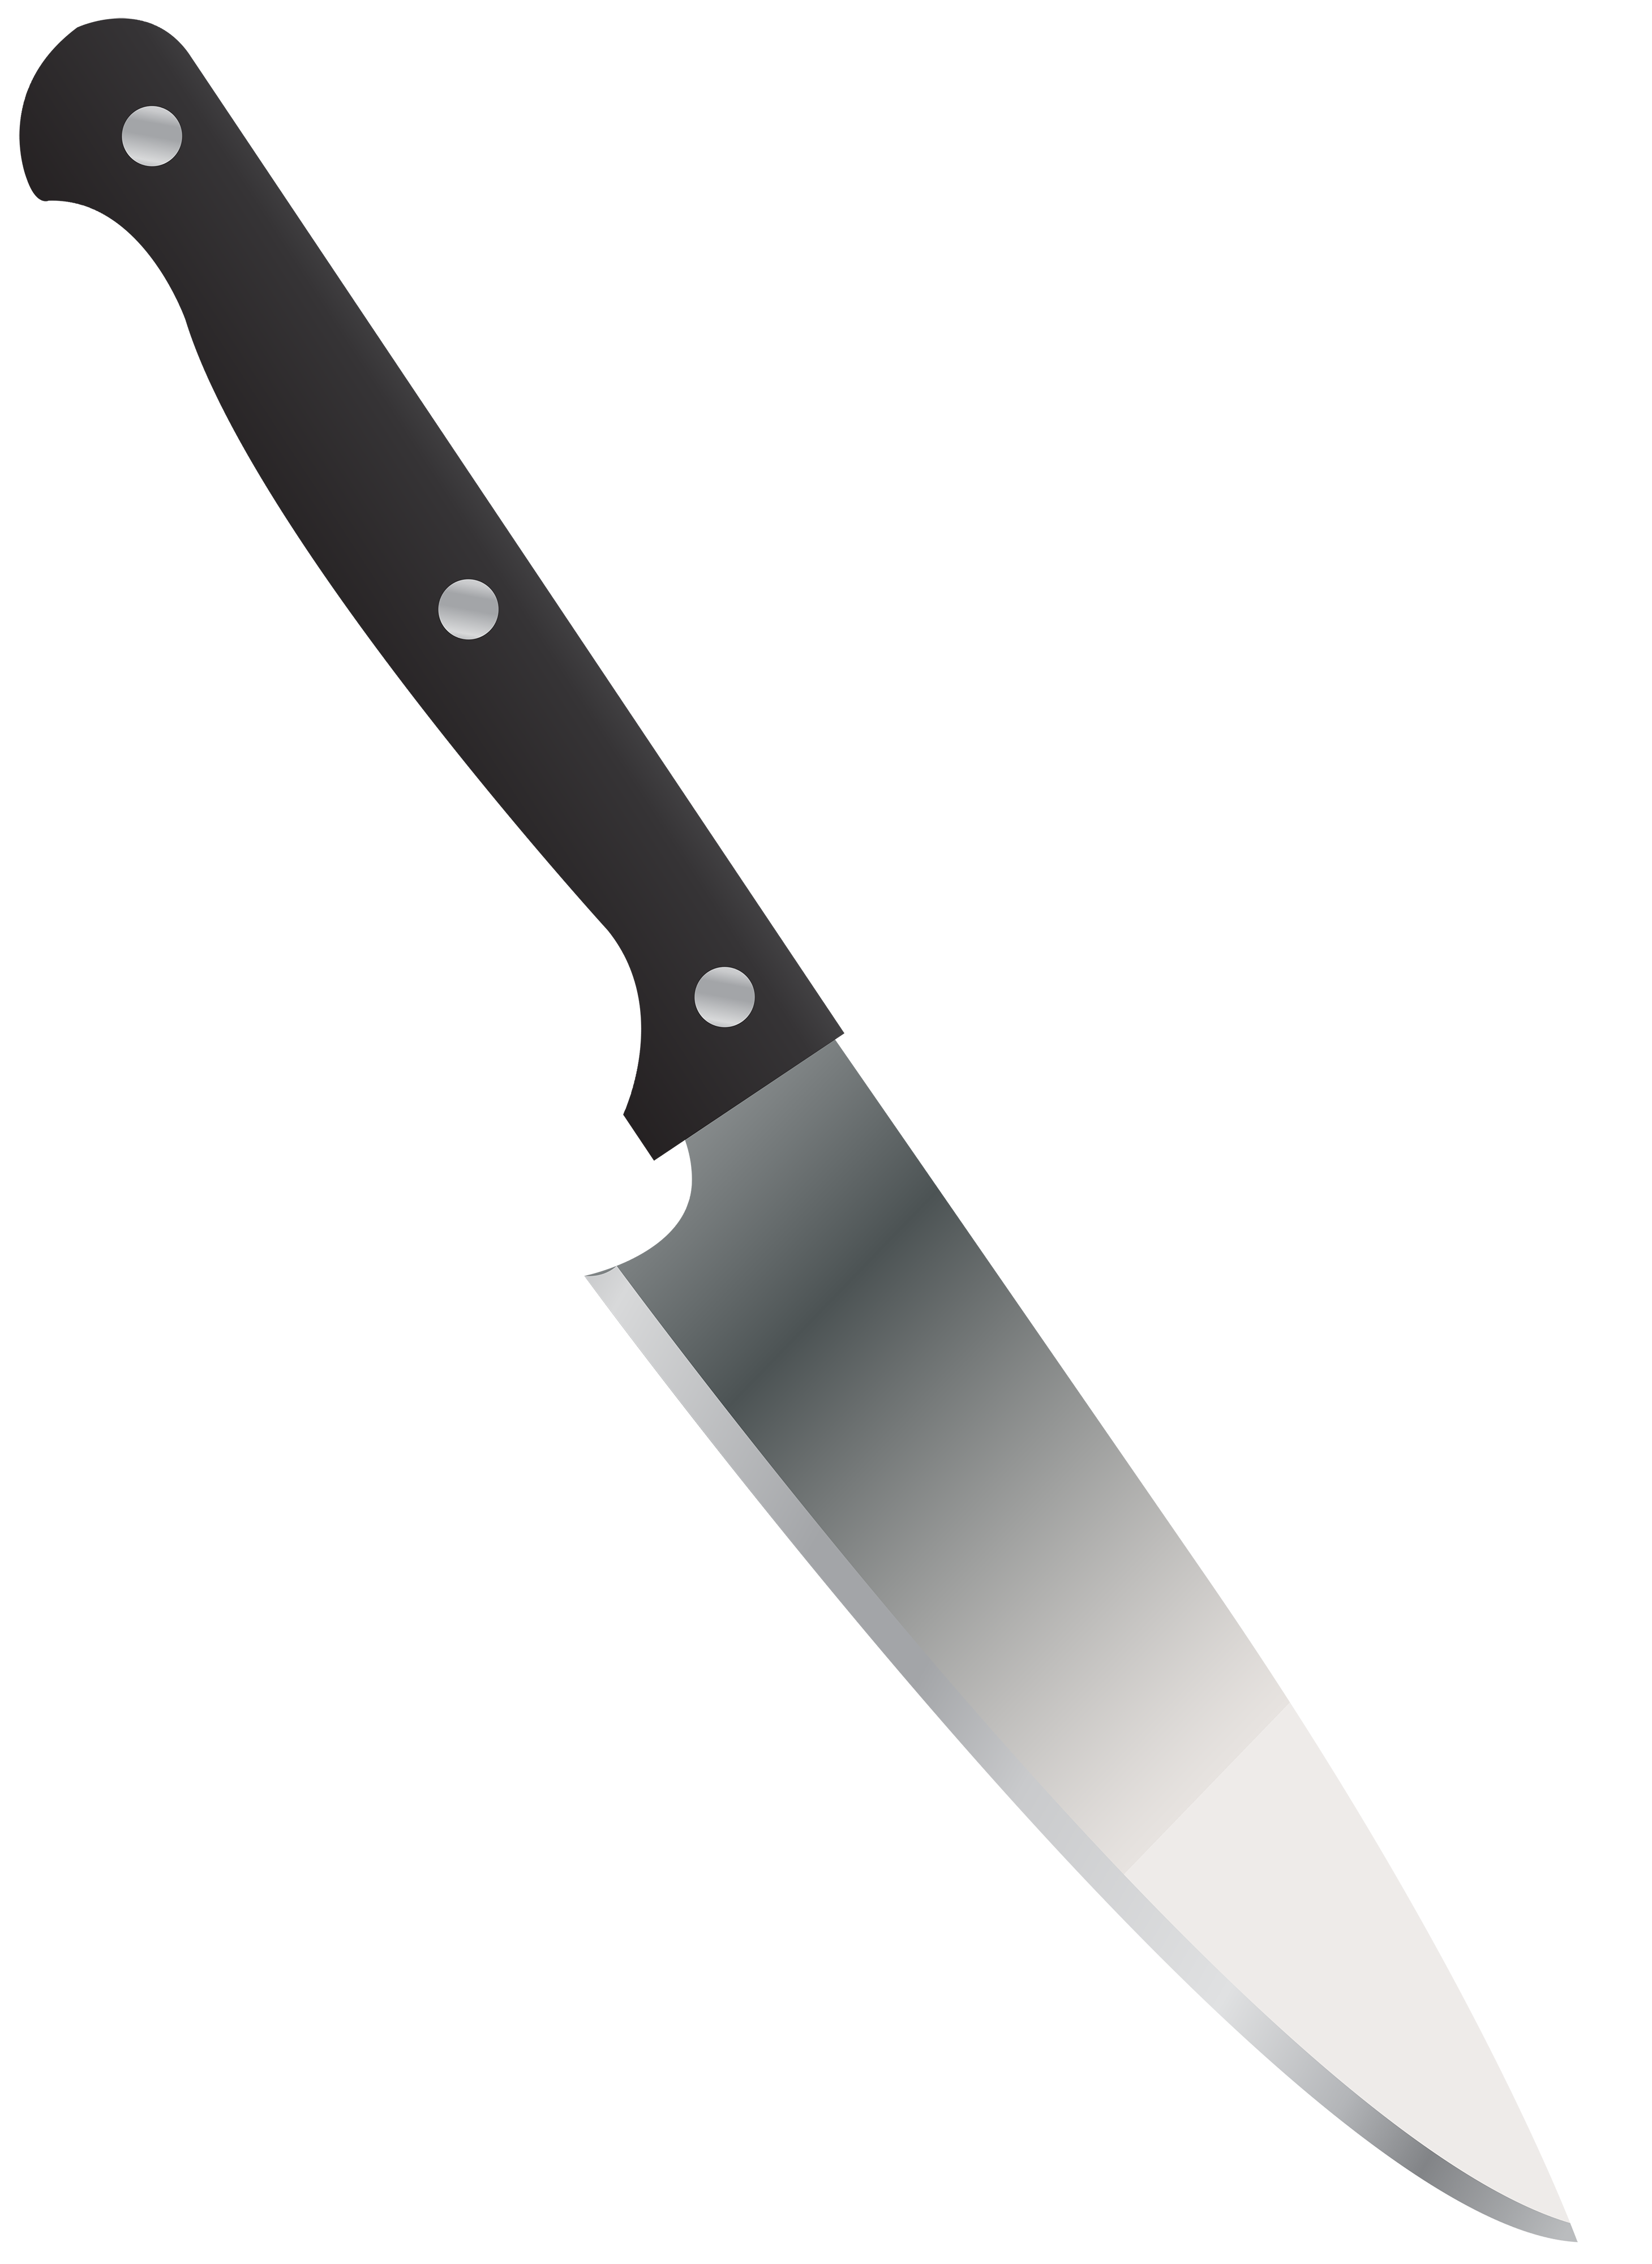 White clipart knife. Kitchen png image clip